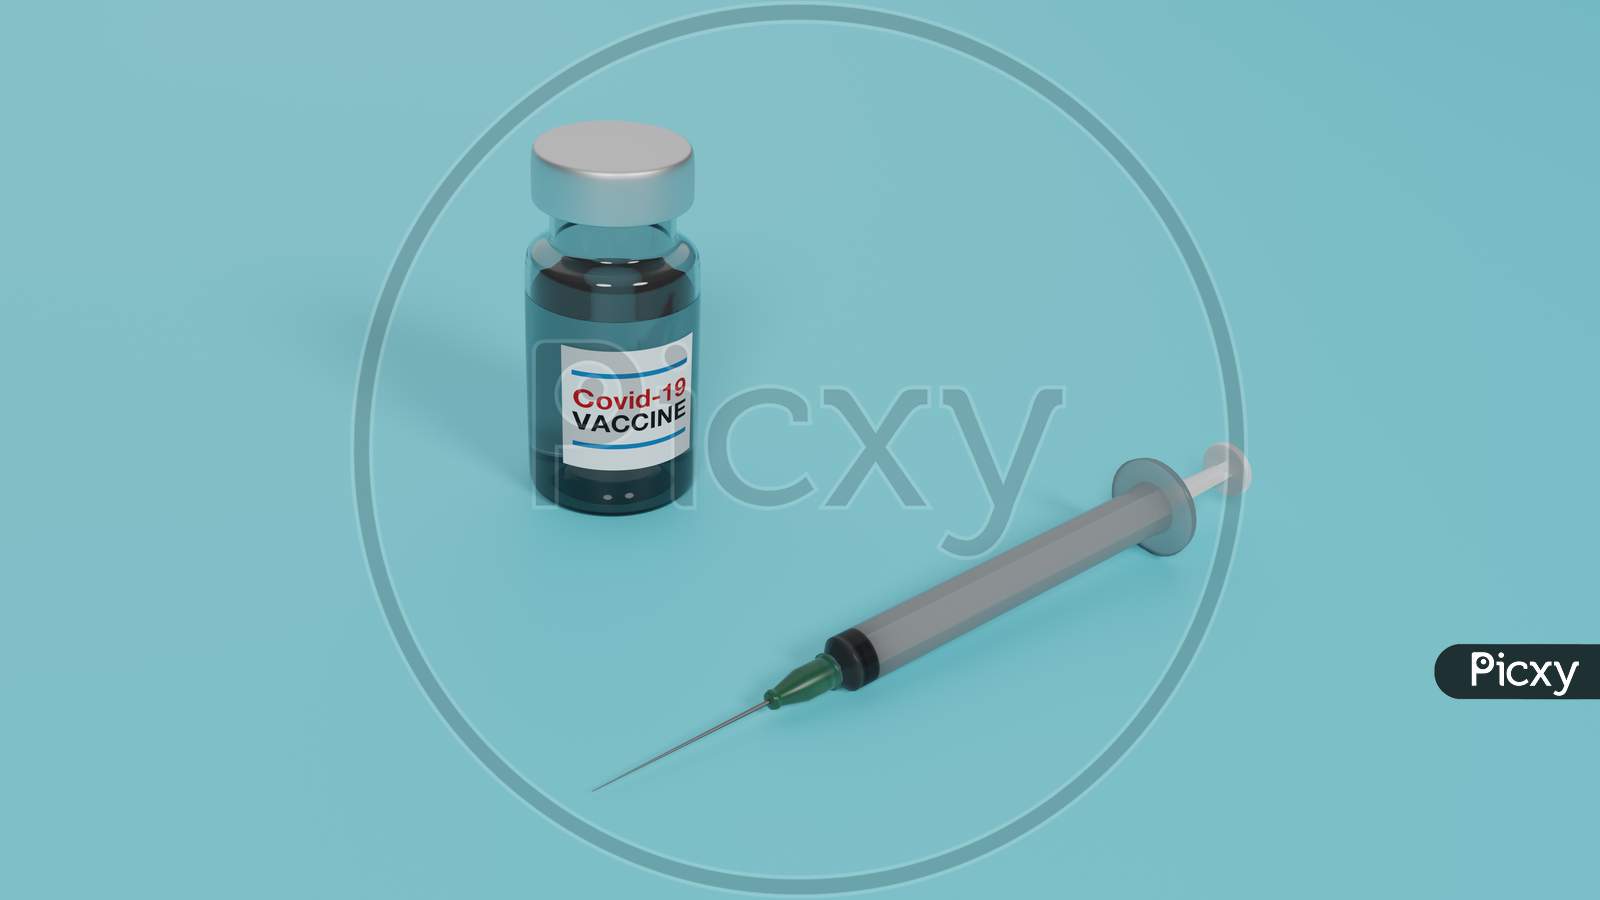 3D Render Of Glass Covid-19 Vaccine Vial Bottle And A Plastic Syringe Placed On A Blue Background